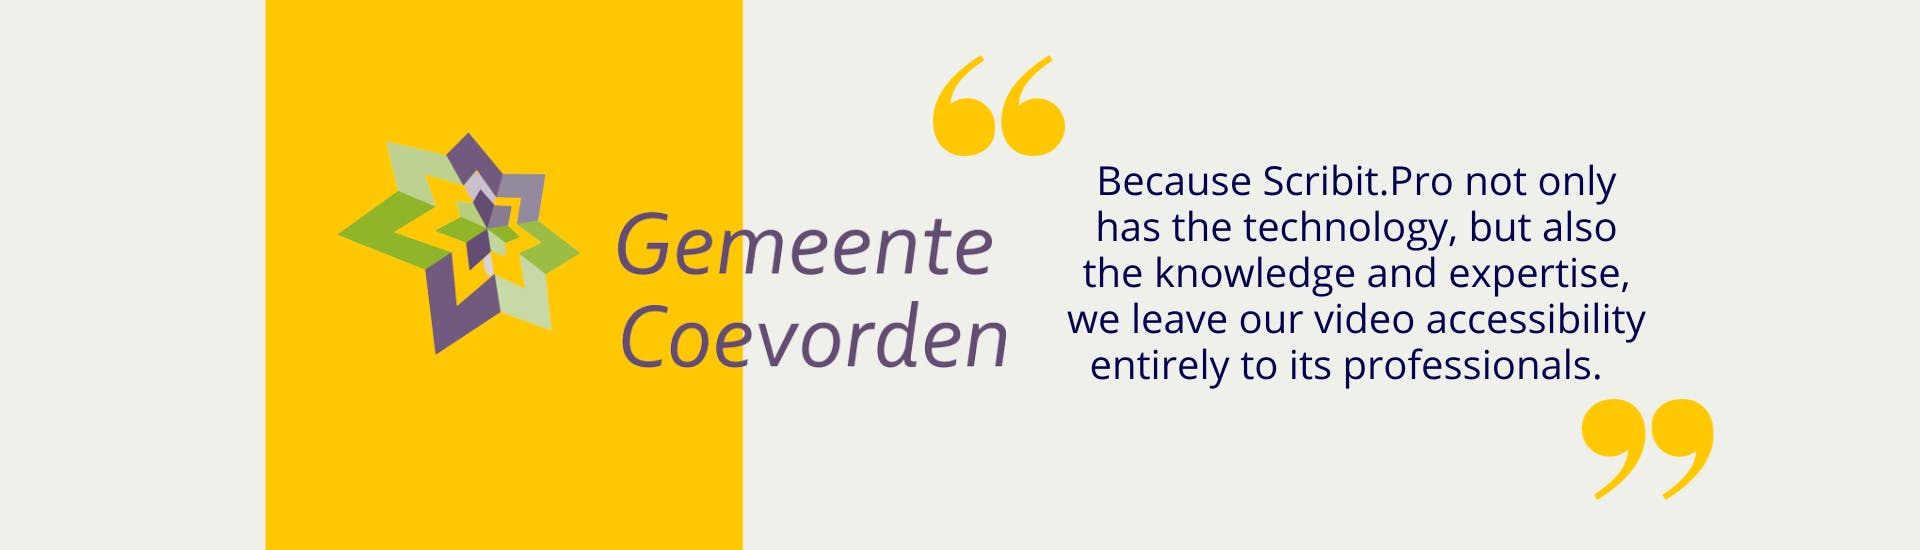 Logo of the Municipality of Coevorden with a yellow area around it. To the right of it it says between yellow quotes: Because Scribit.Pro not only has the technology, but also the knowledge and expertise, we leave our video accessibility entirely to its professionals.